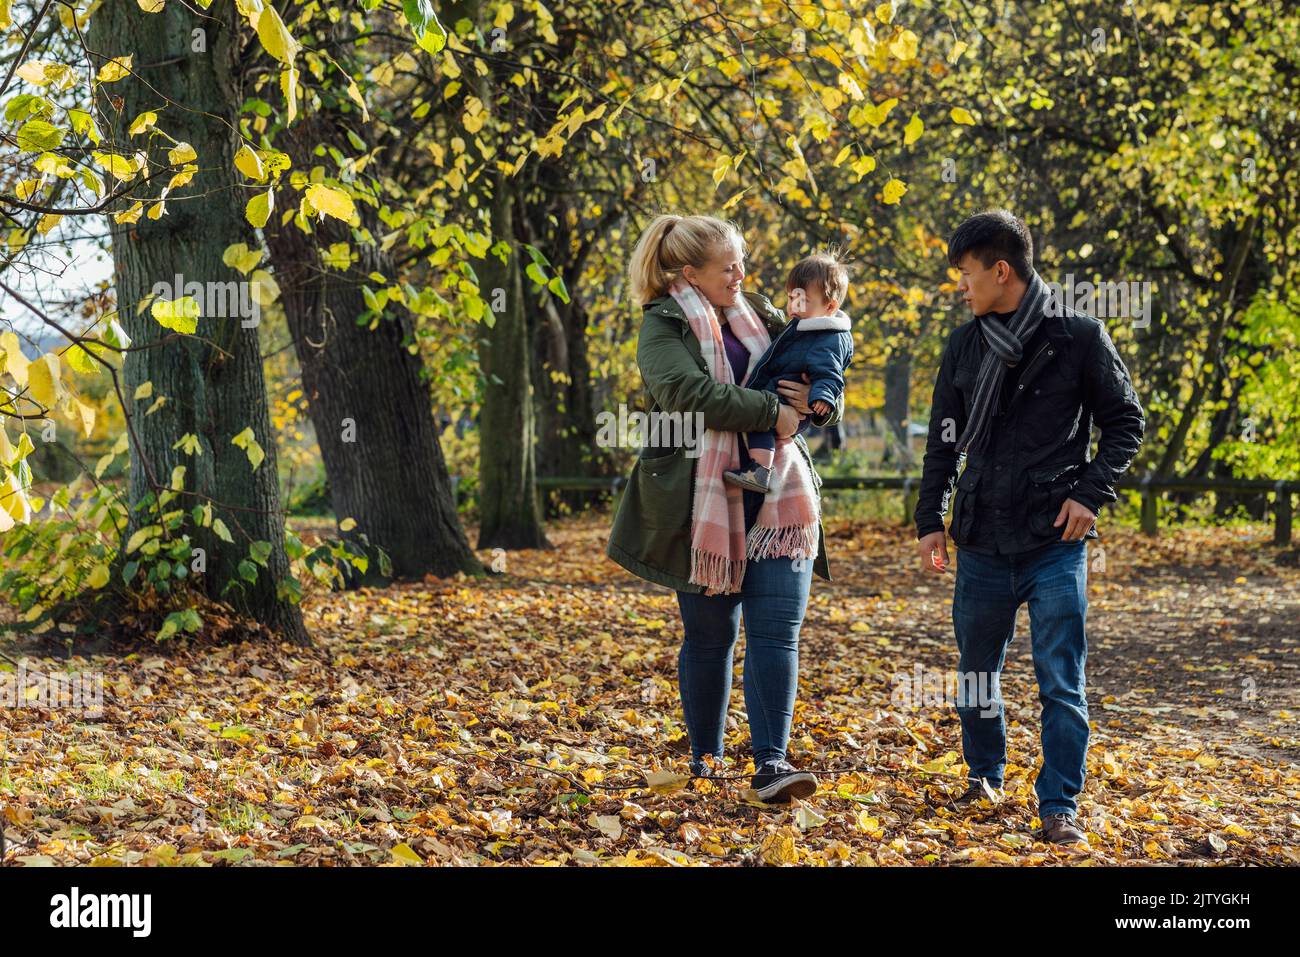 A couple walking through a park in nature Northumberland, North East England with their baby boy, who the woman is carrying in her arms. Stock Photo